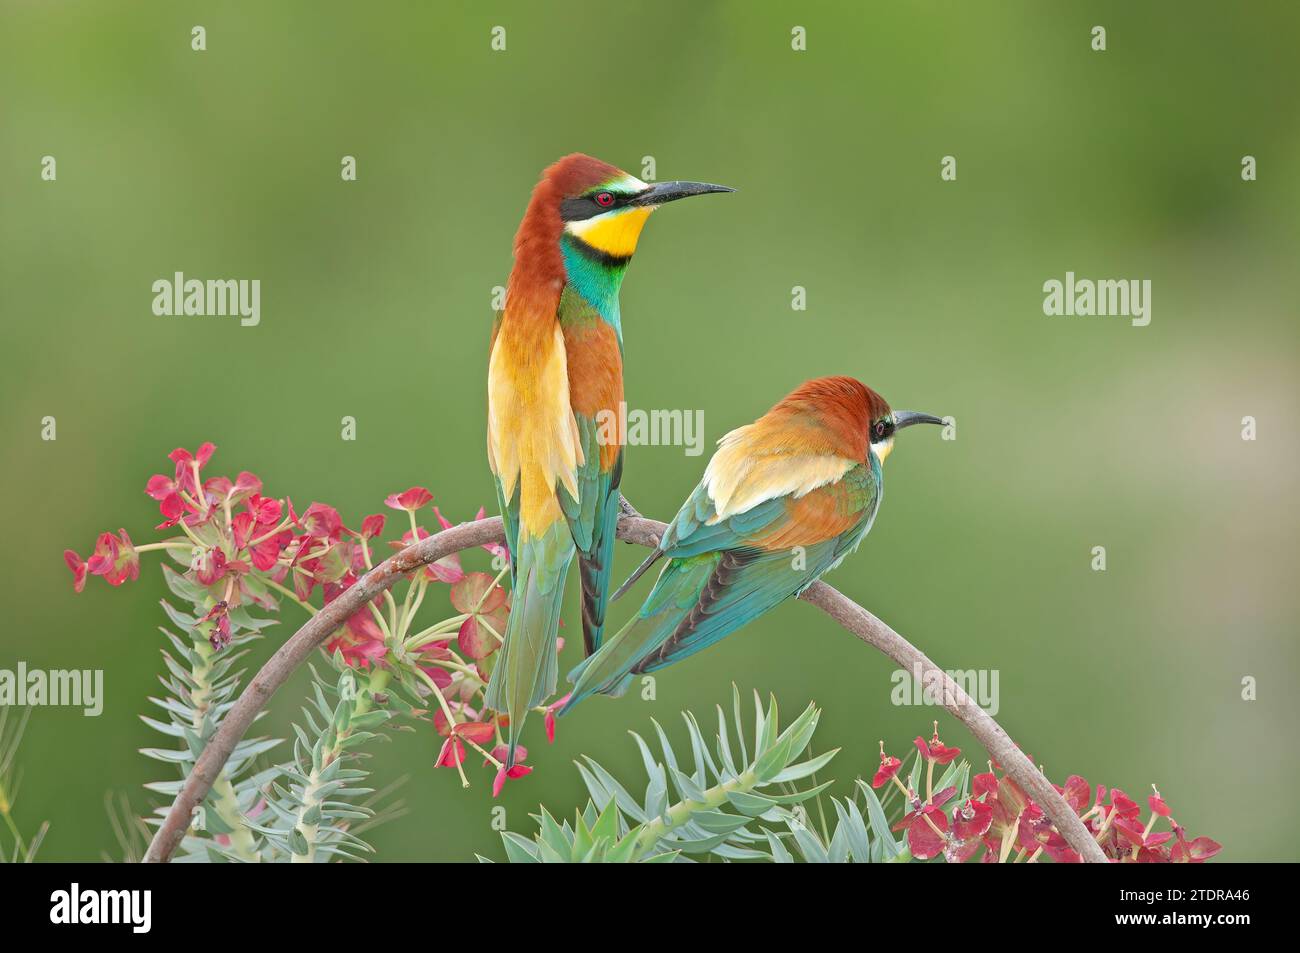 European Bee-eaters, Merops apiaster on the branch. Green background. Colourful birds. Stock Photo